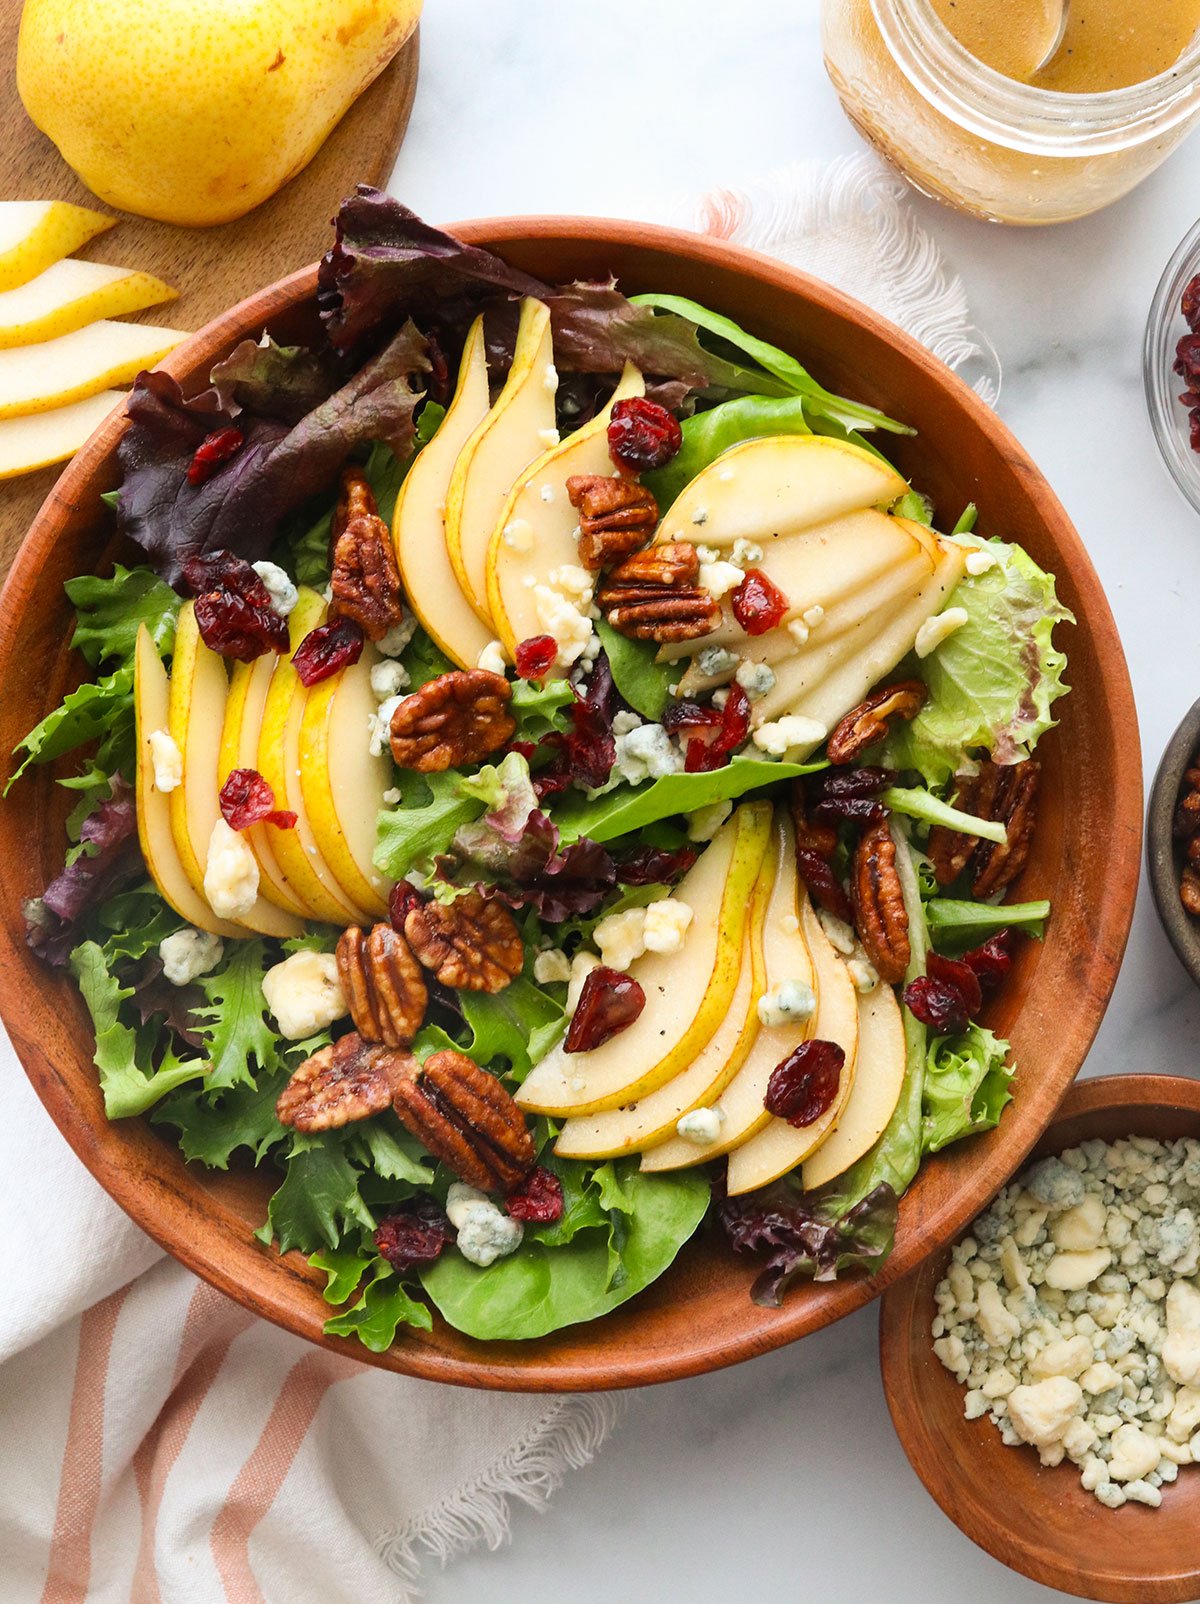 pear salad served with cranberries and pecans on top.